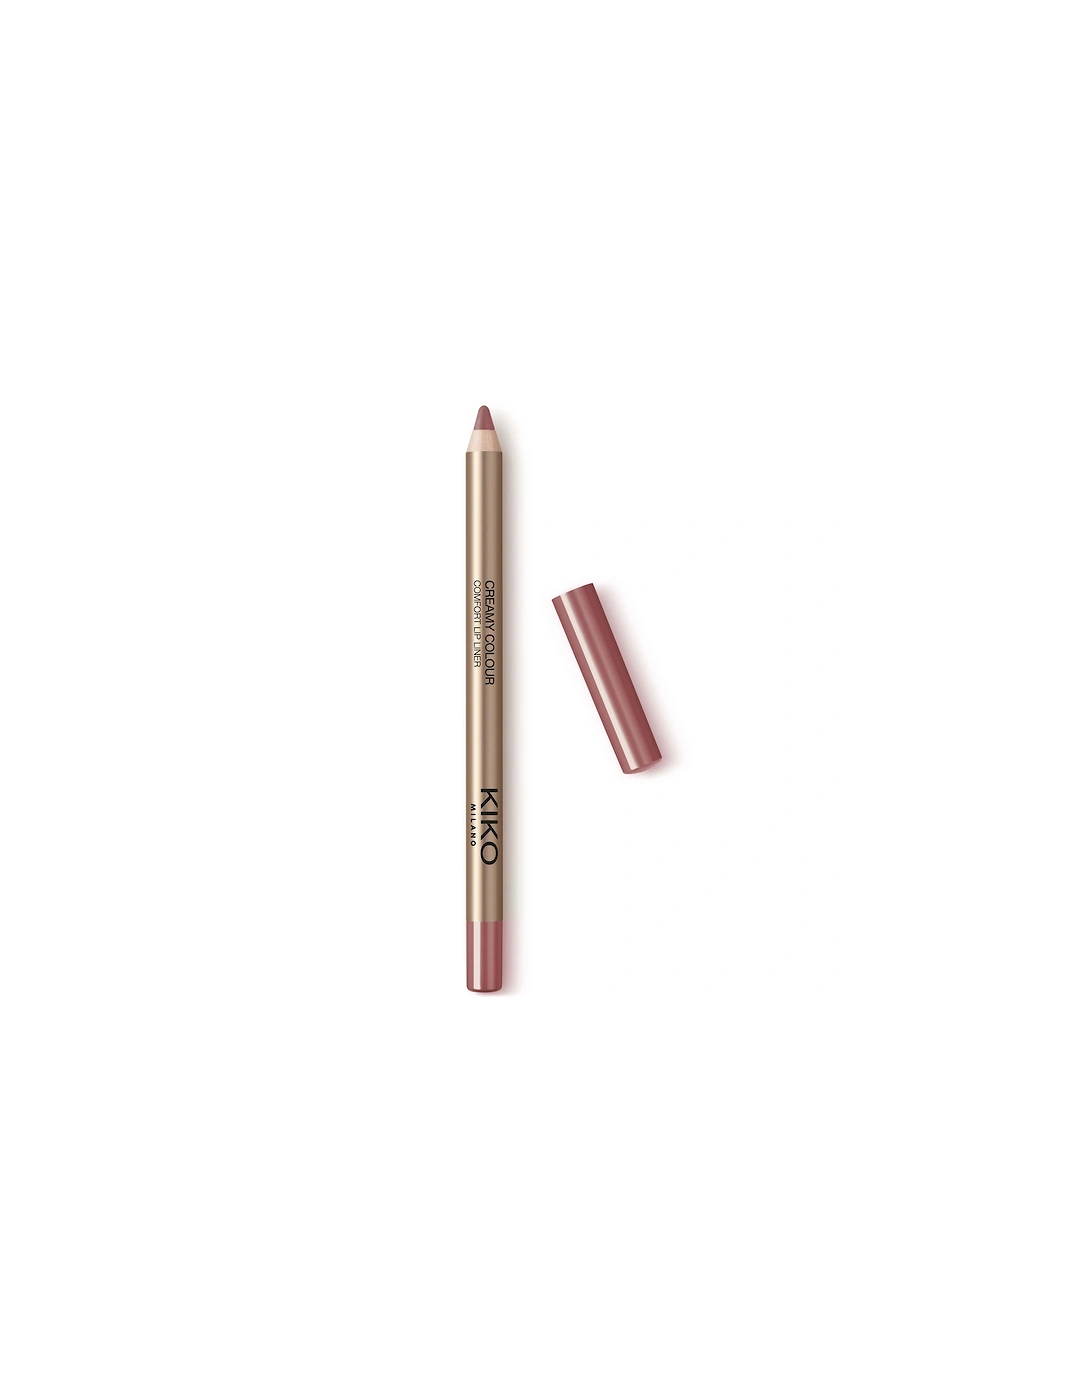 Creamy Colour Comfort Lip Liner - 05 Pinkish Brown, 2 of 1